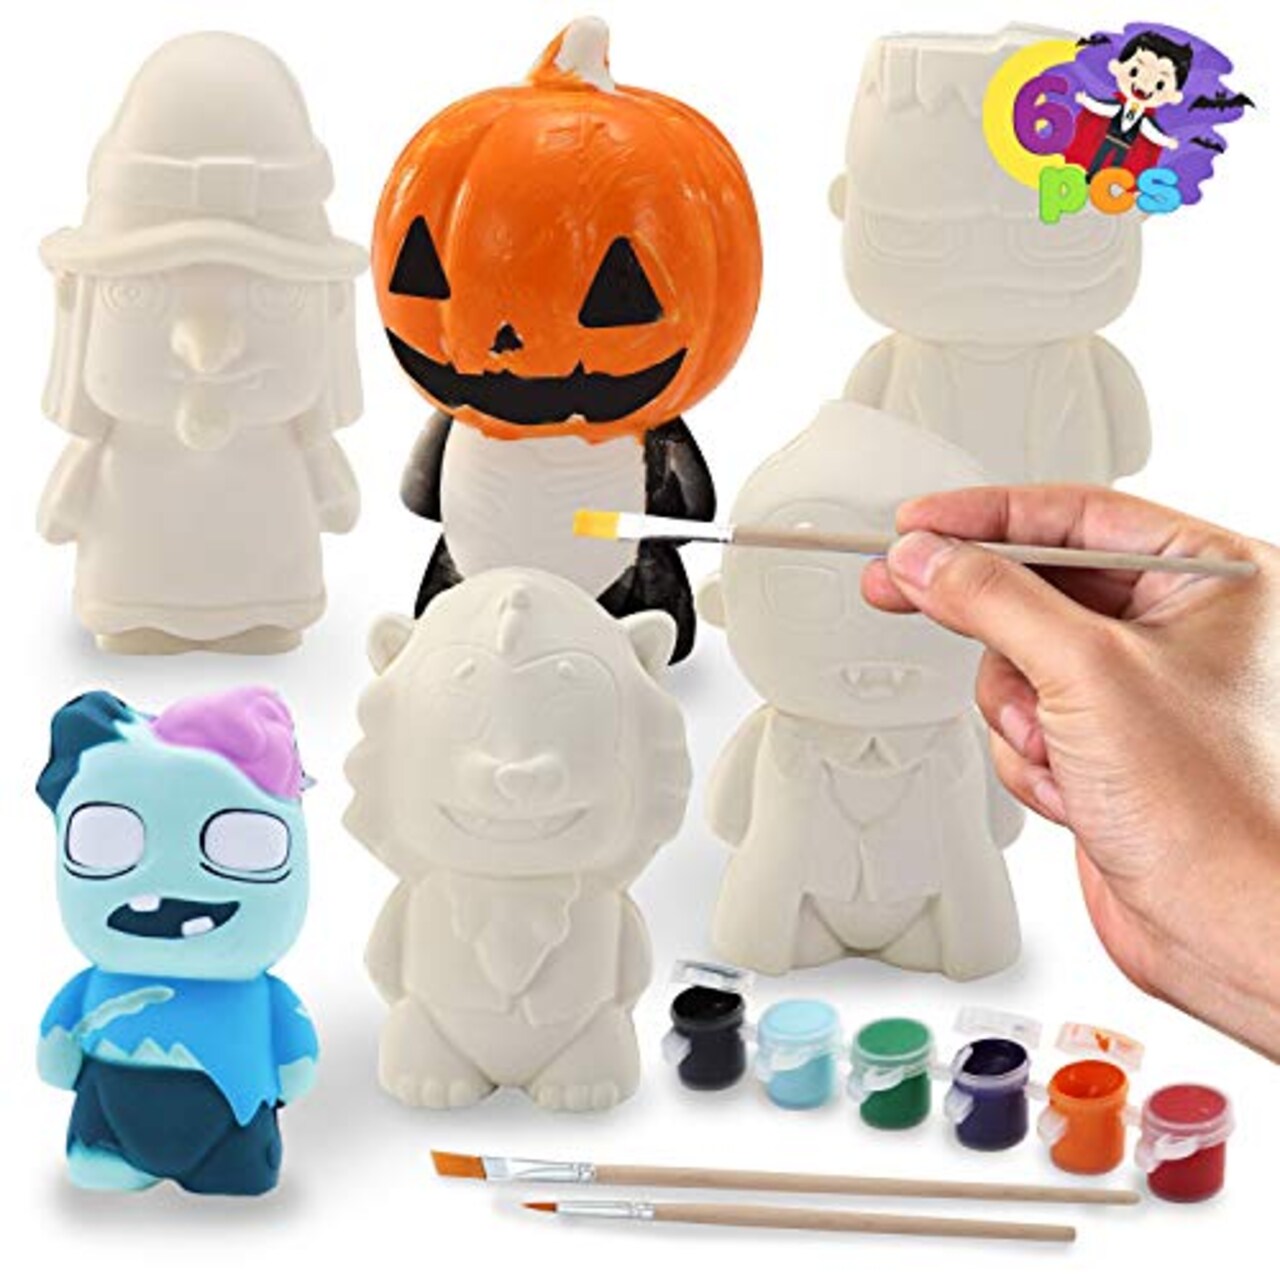 JOYIN Halloween Squishy Coloring Craft Kit with 6 Different Characters, 3  Paints and Paint Tubs, Art & Craft Kit DIY Toy Set Make Your Own Halloween  Squishy Friends